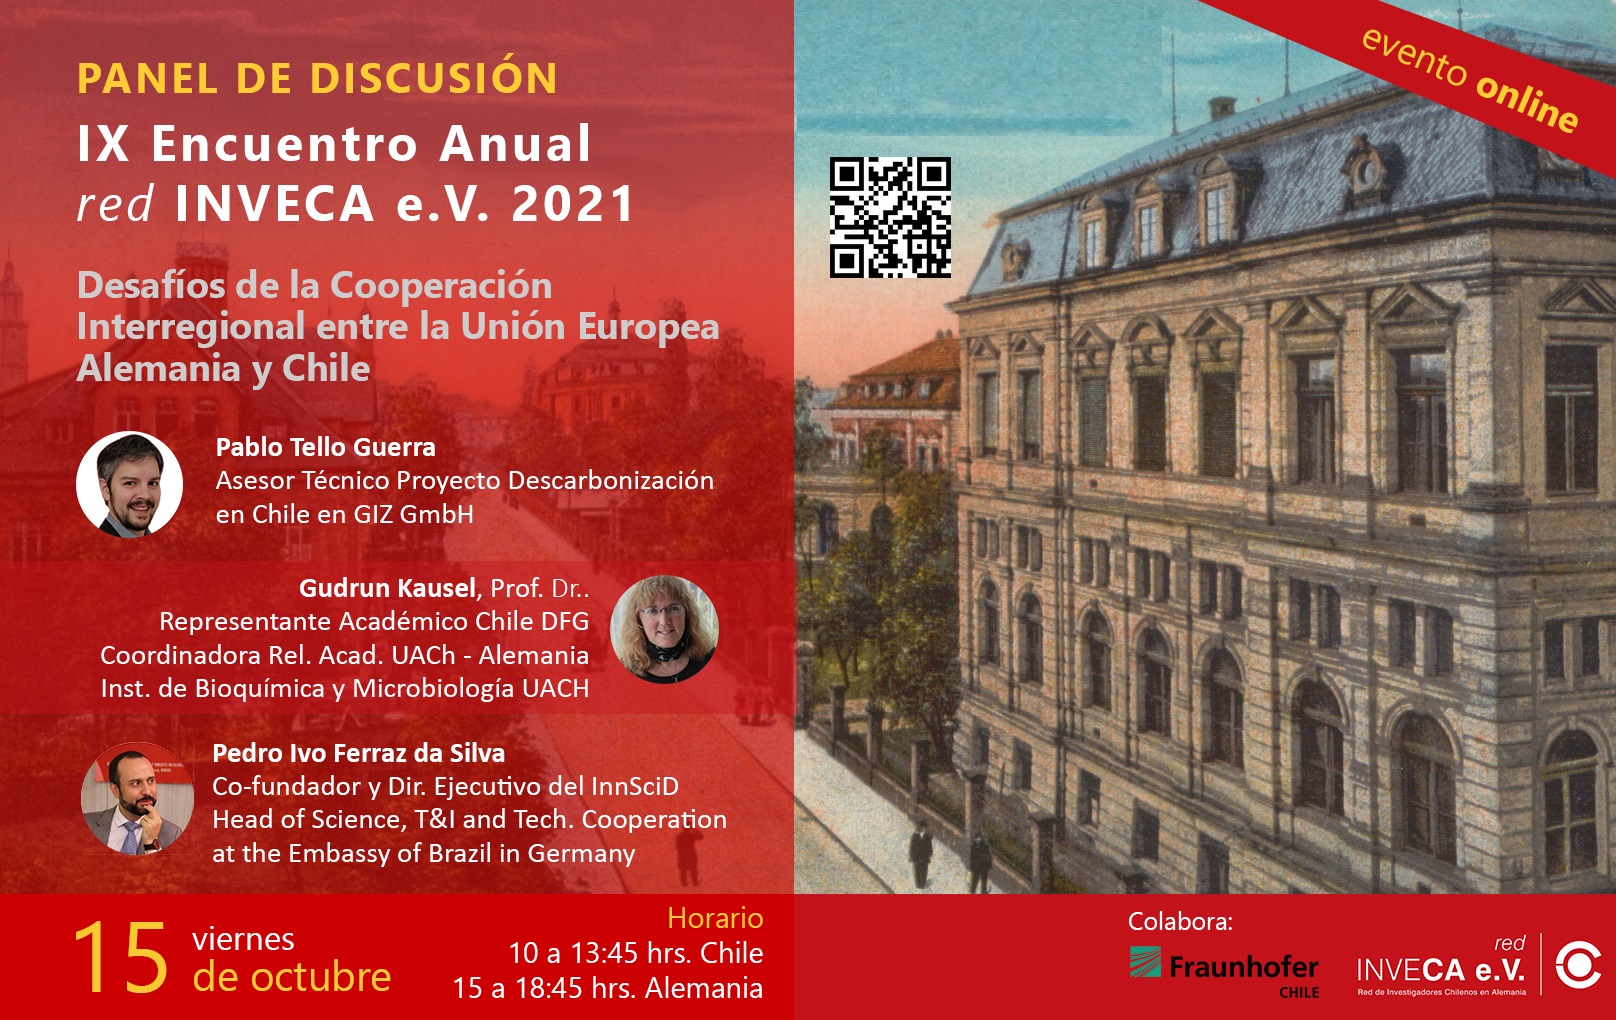 9th Annual Meeting of the Network of Chilean Researchers in Germany – Red INVECA e.V.